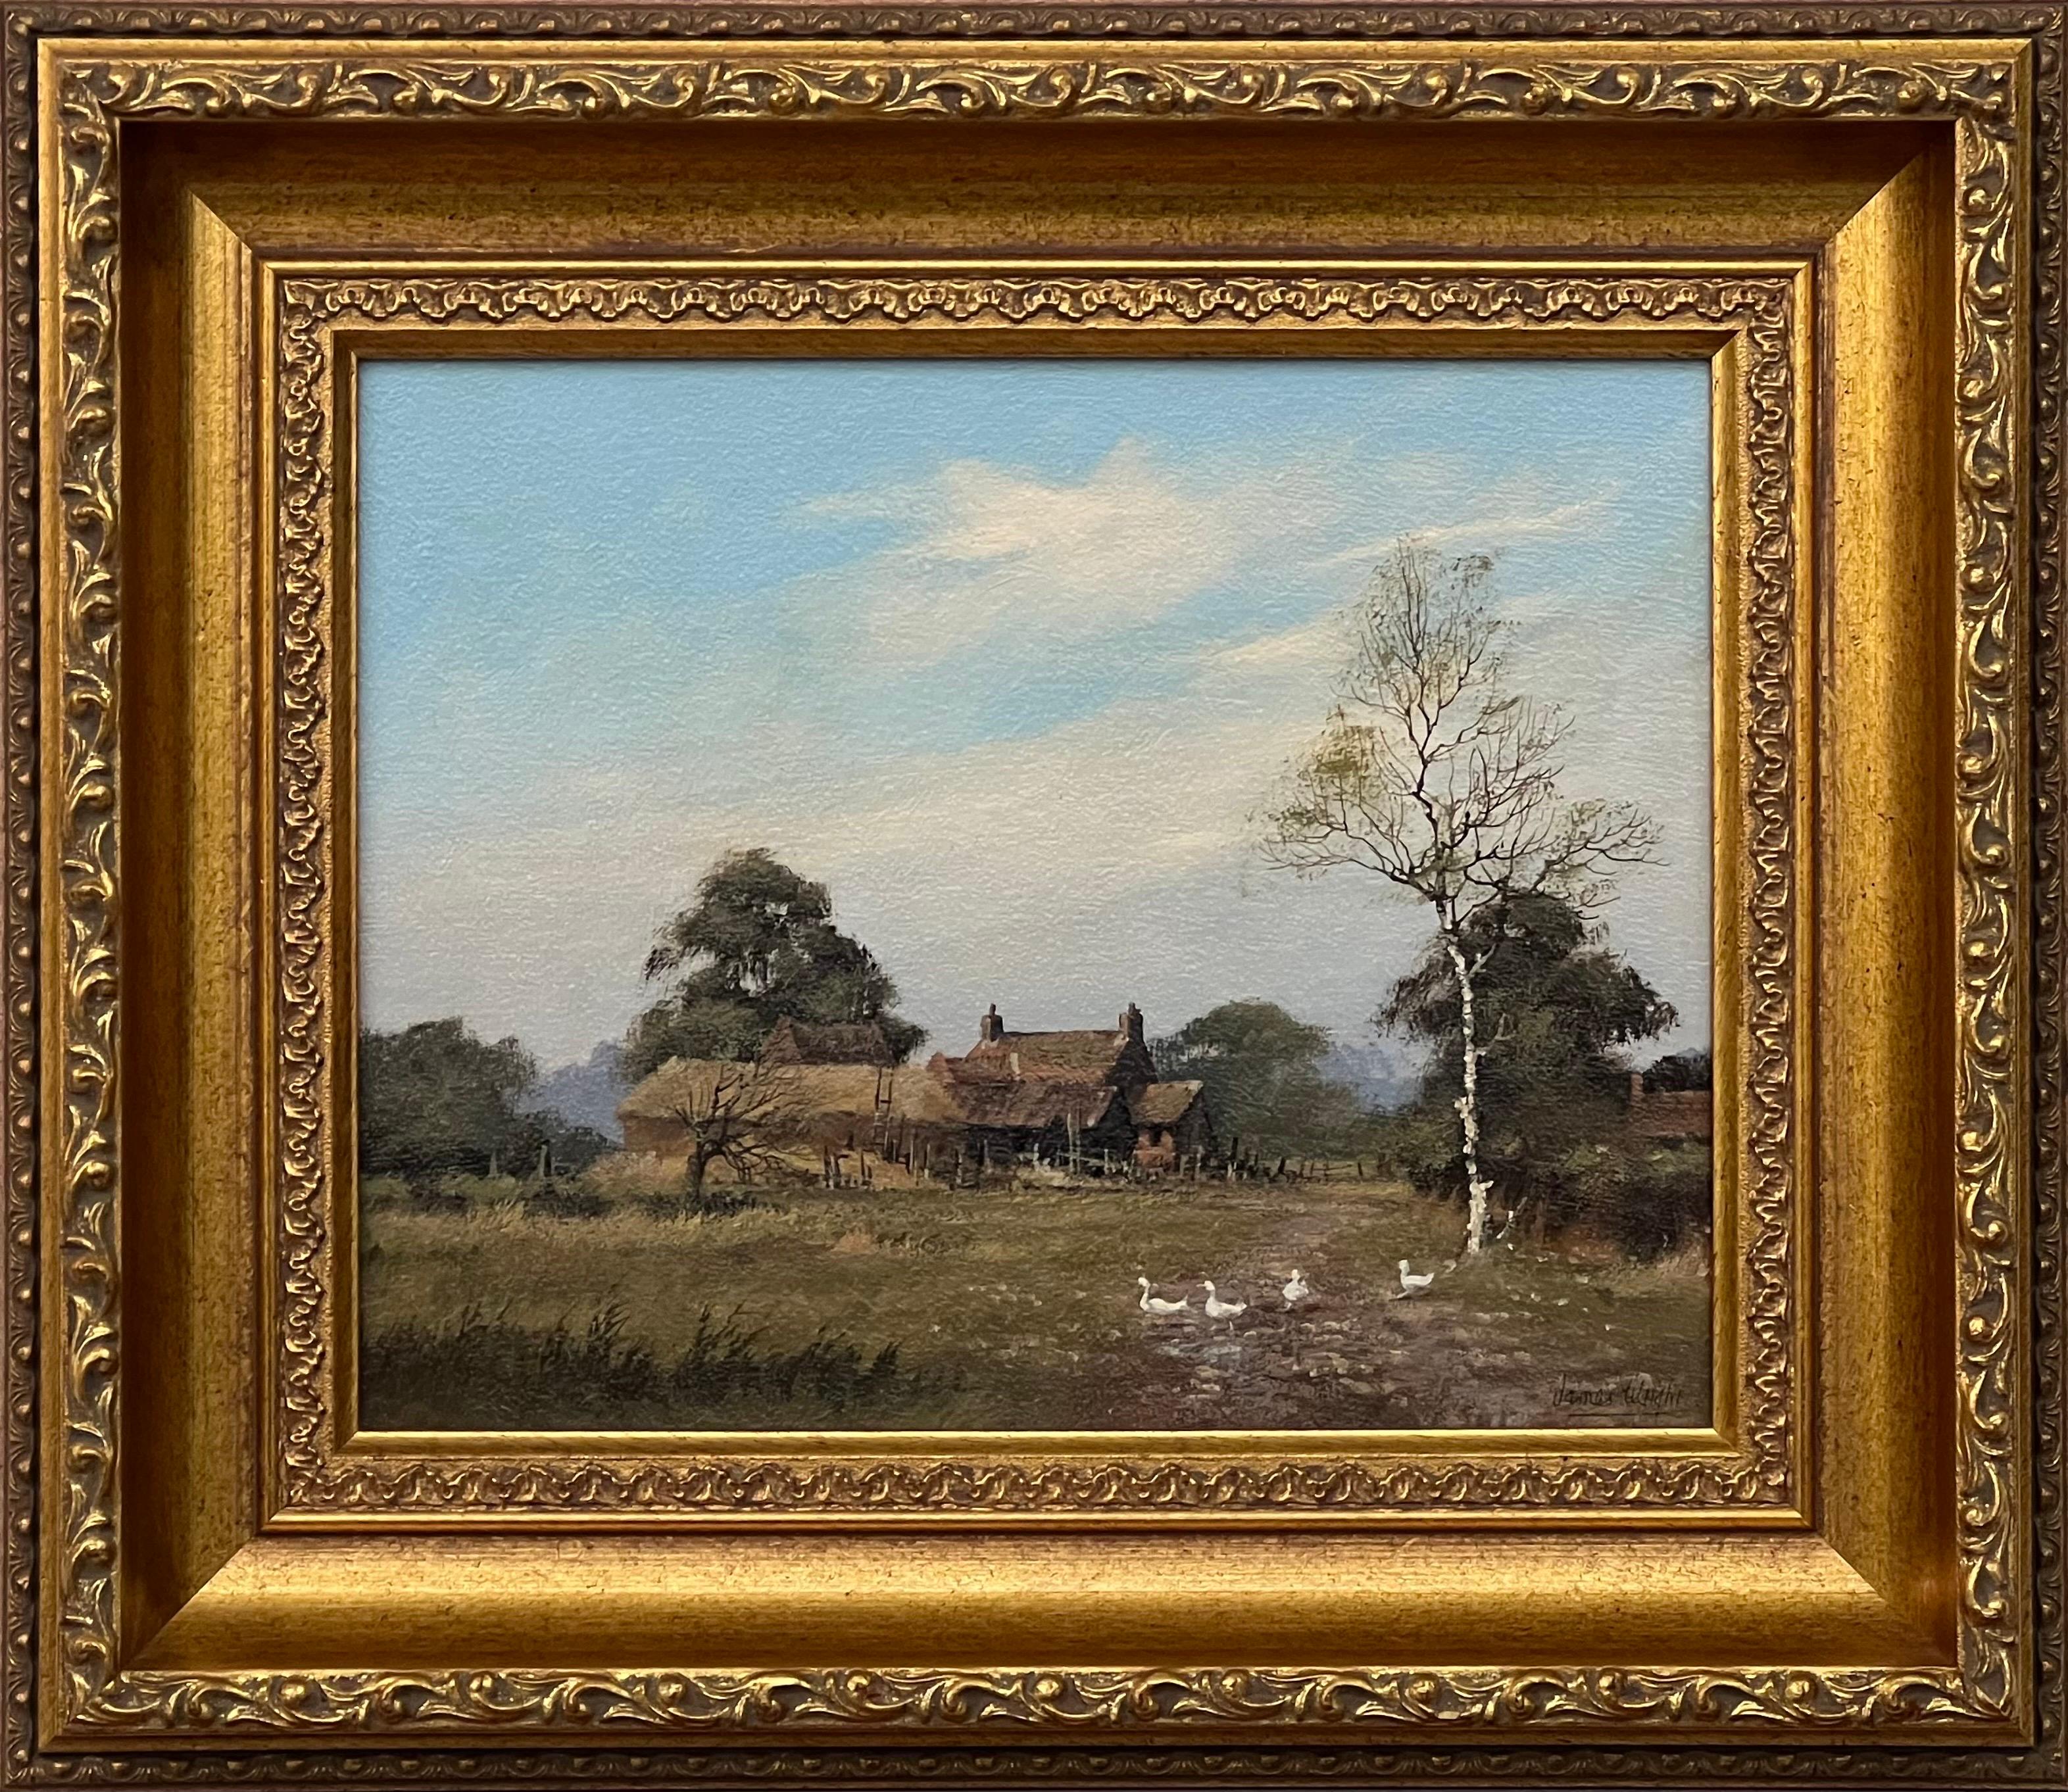 James Wright Figurative Painting - Painting of Farm with Geese in the English Countryside by 20th Century Artist